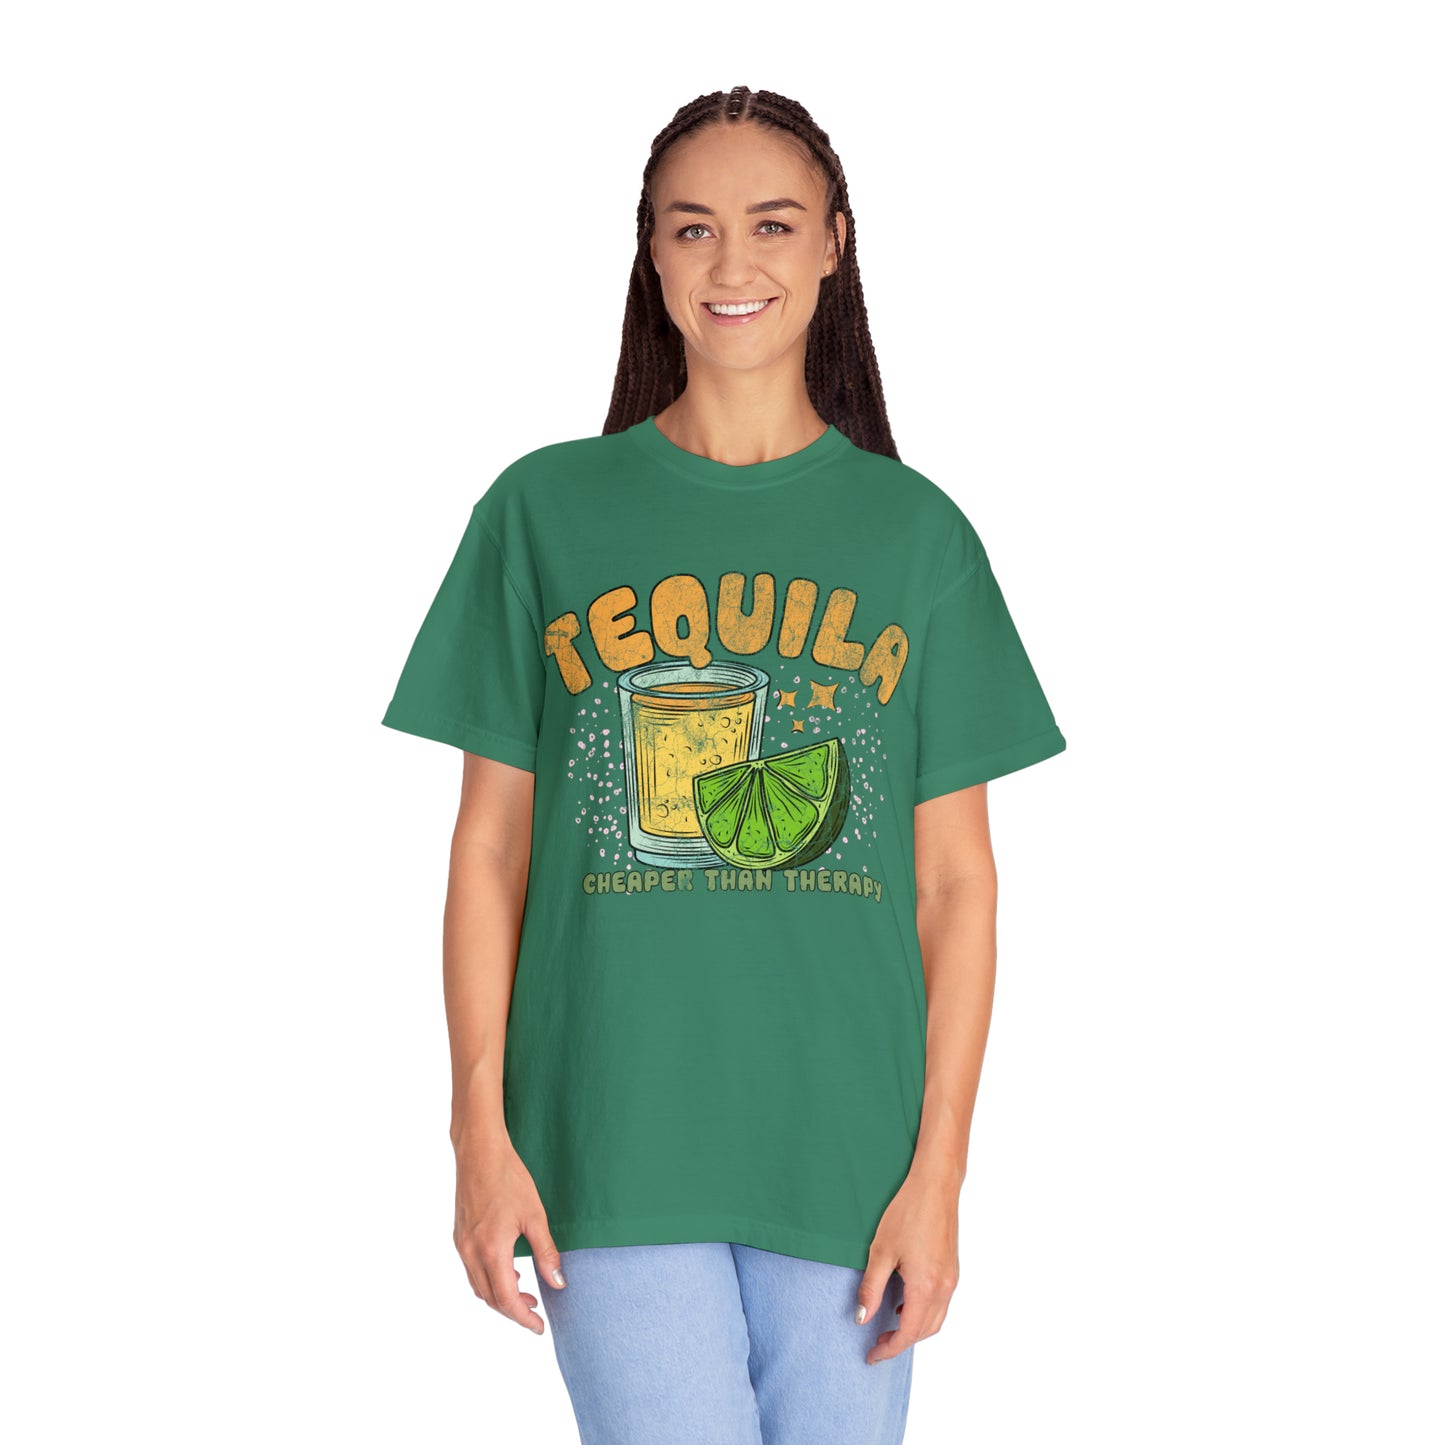 "Tequila, Cheaper Than Therapy" Comfort Colors Oversized T-shirt